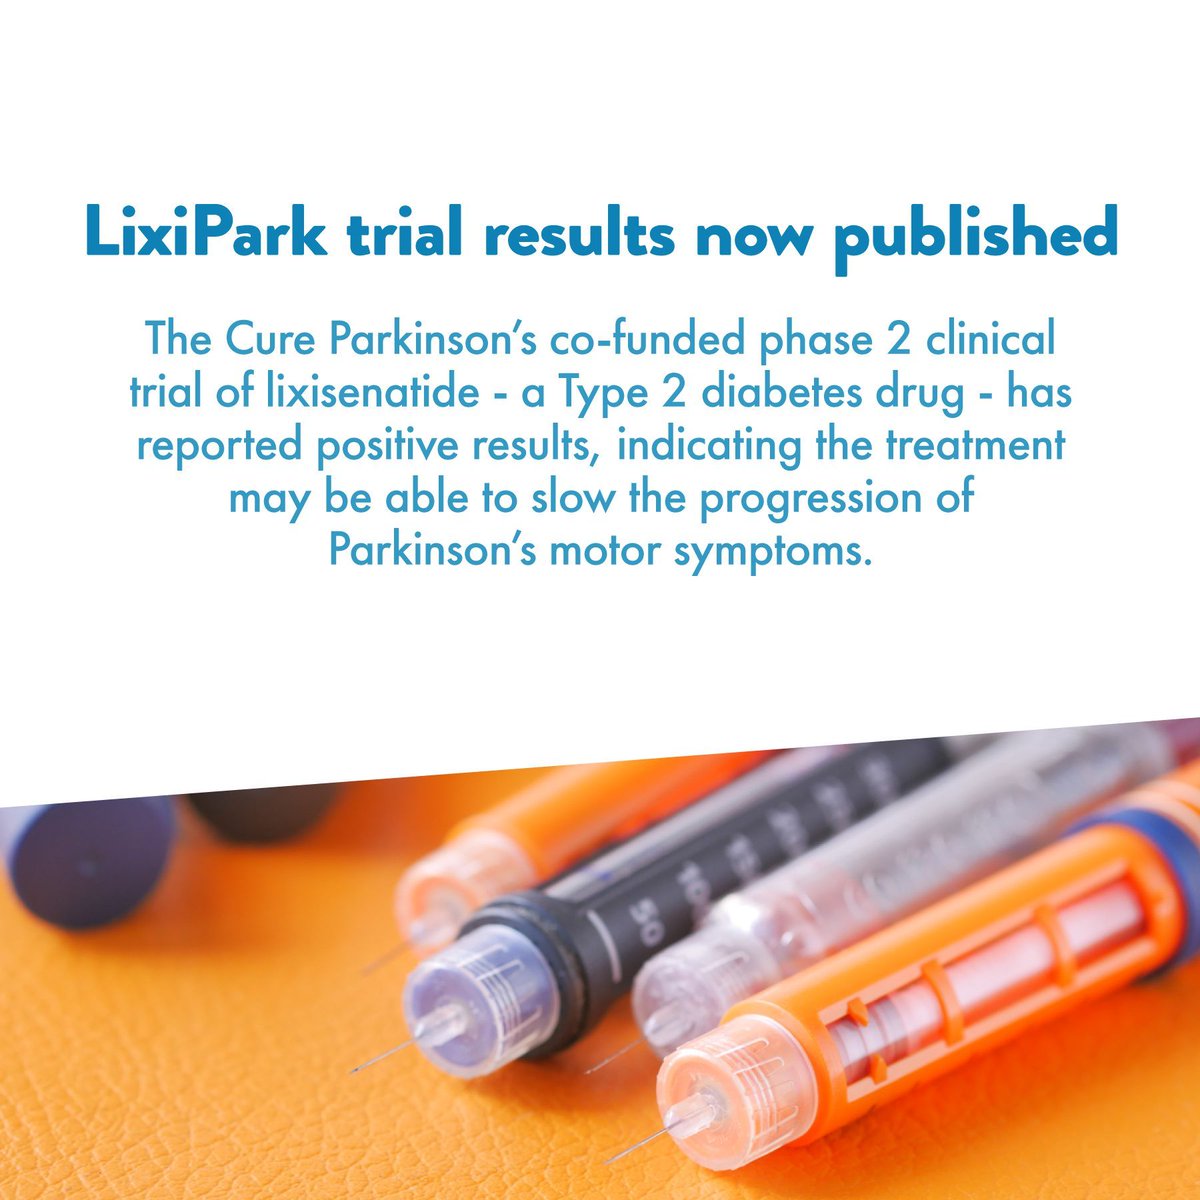 Cure Parkinson’s continues to drive our research efforts forward to ensure that if these medicines can slow #Parkinsons progression we will do our utmost to ensure they can be made available to people with Parkinson’s as quickly as possible: buff.ly/4aBOZN2 @VAInstitute